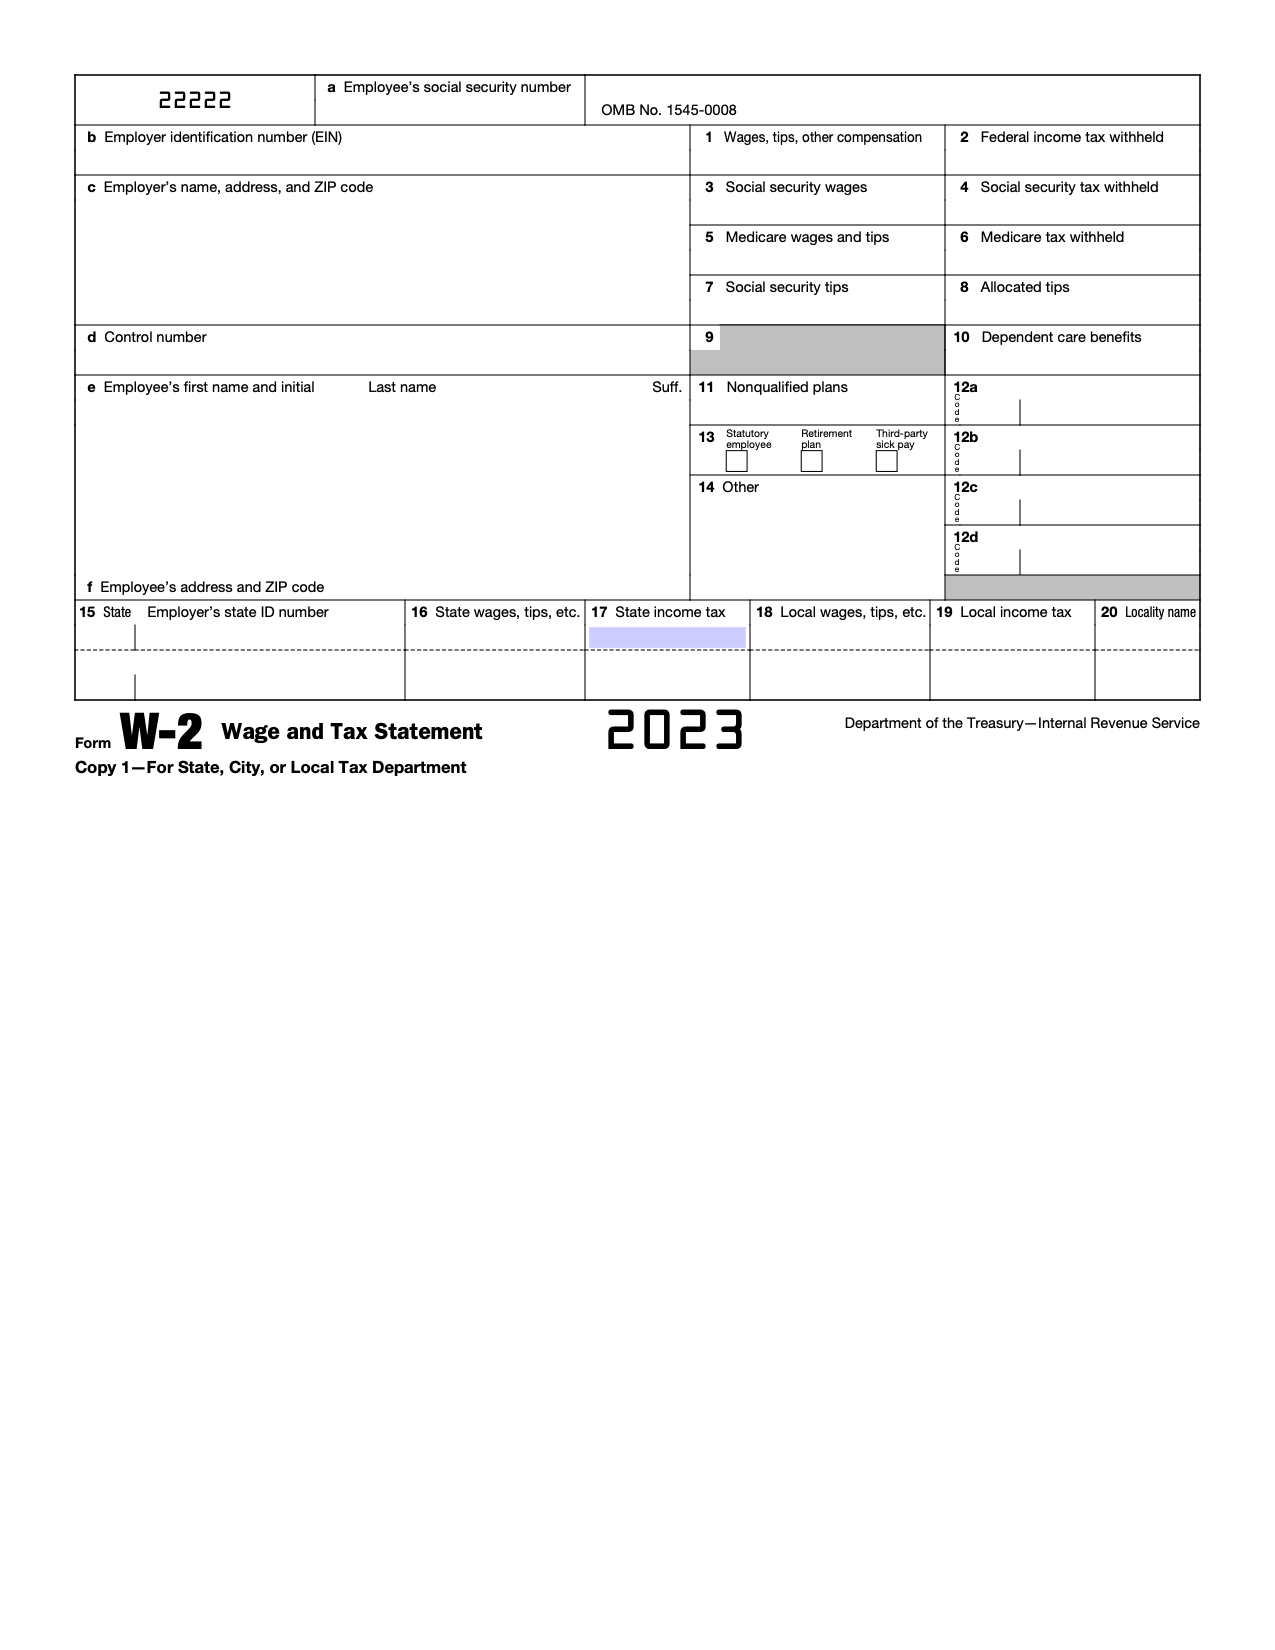 Free Irs Form W-2 | Wage And Tax Statement - Pdf – Eforms inside Download W2 Forms